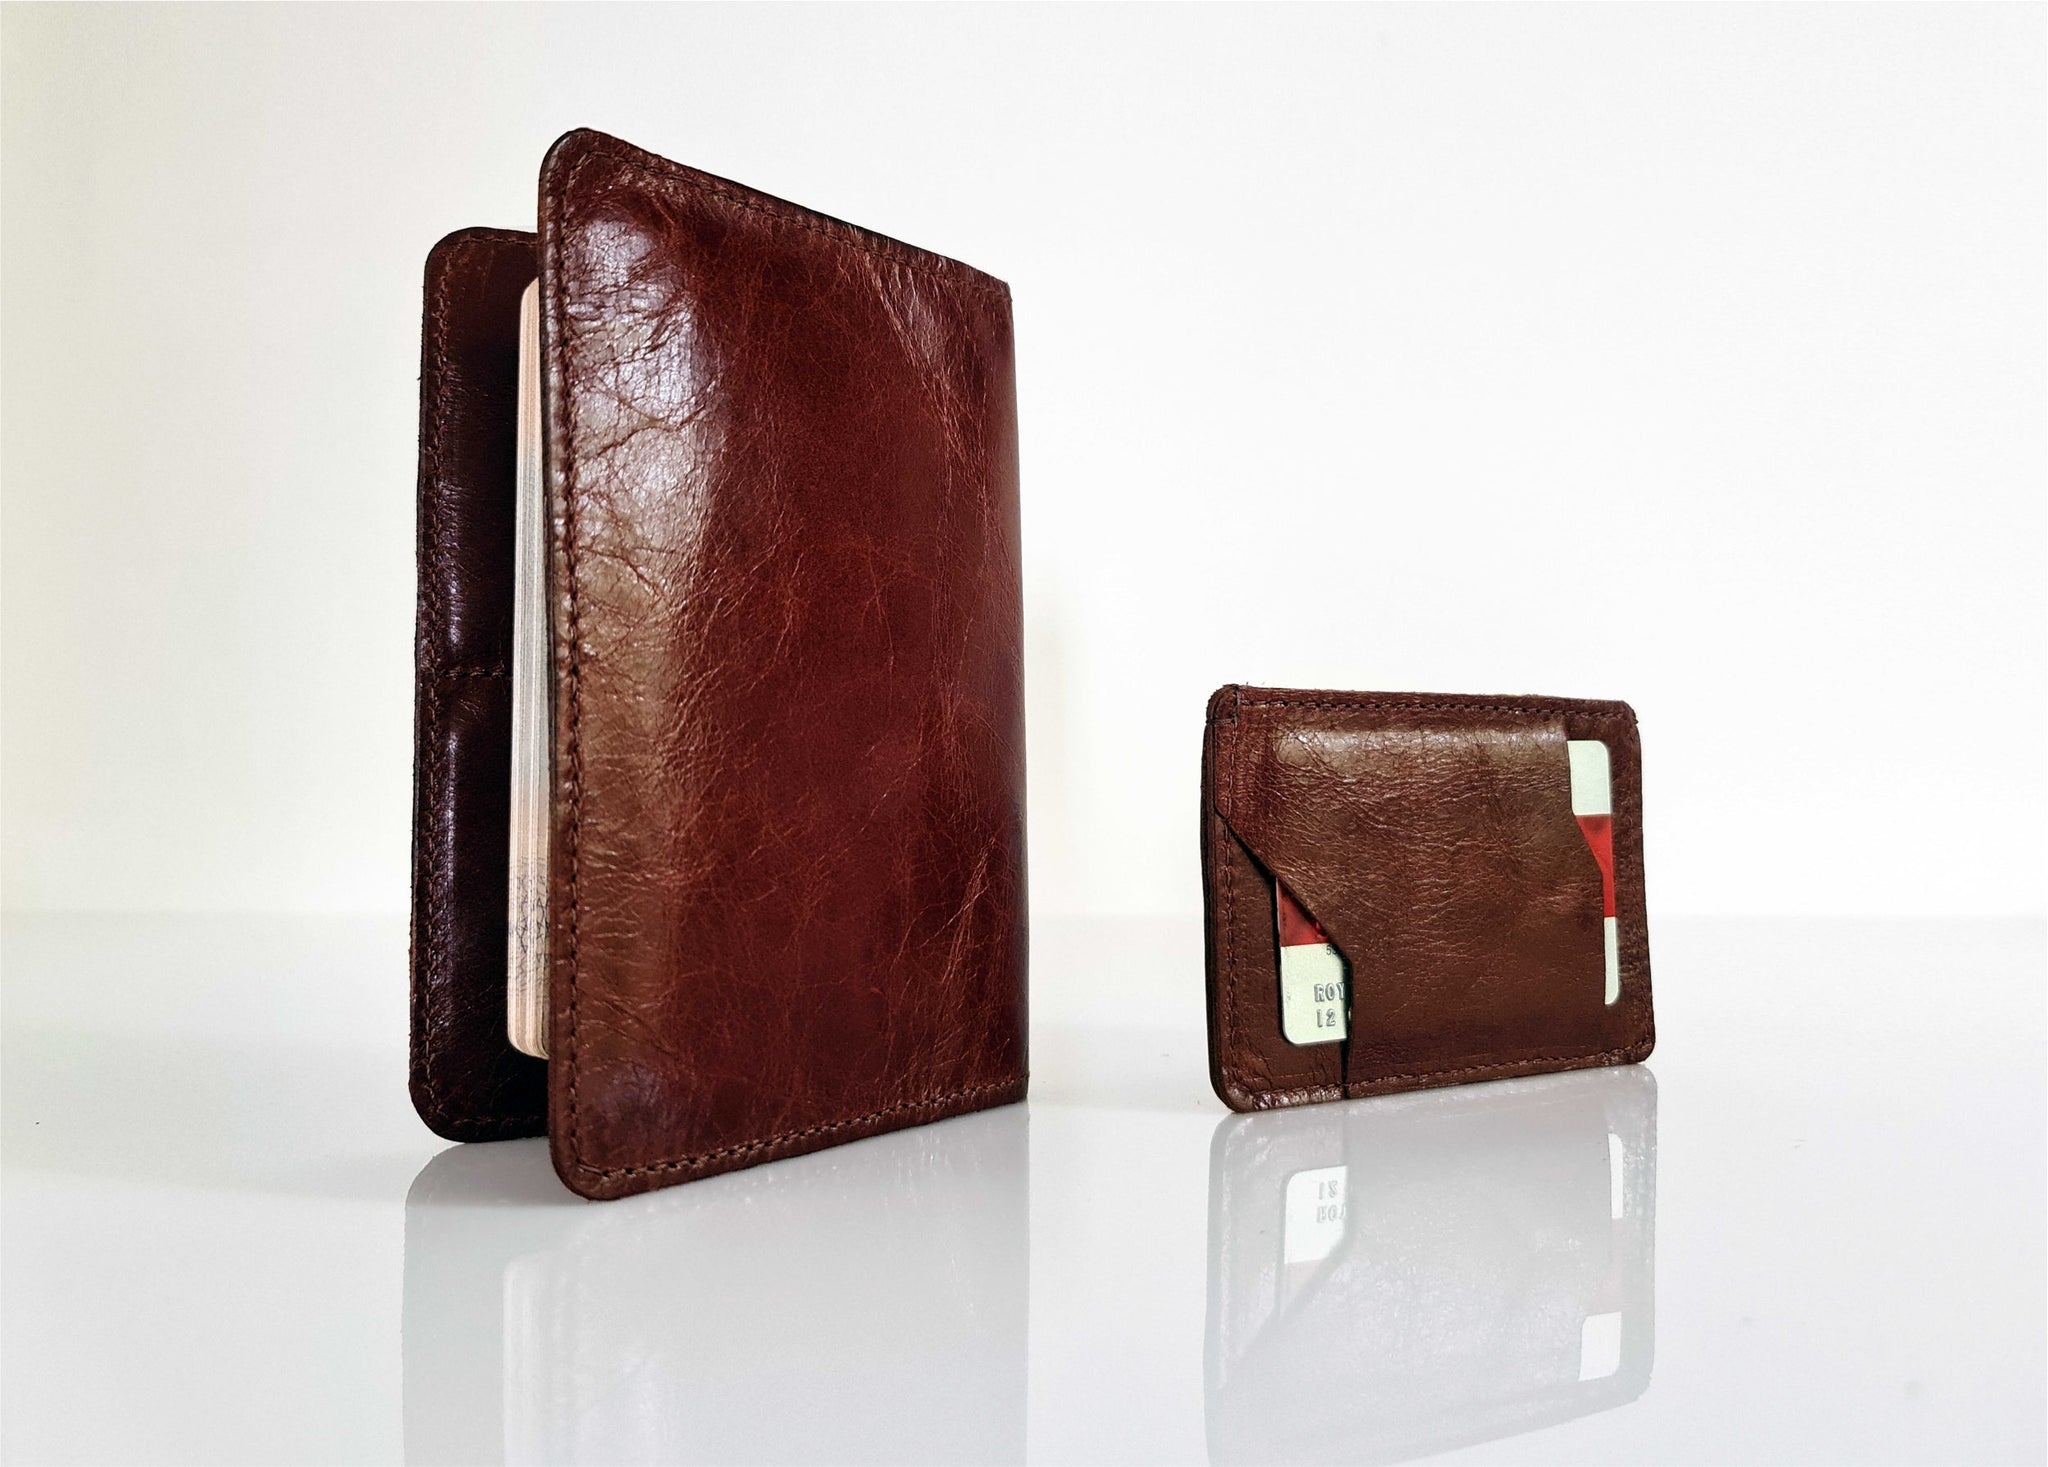 Buffalo Leather Passport Wallet - Travel Organizer Wallet - Made in USA